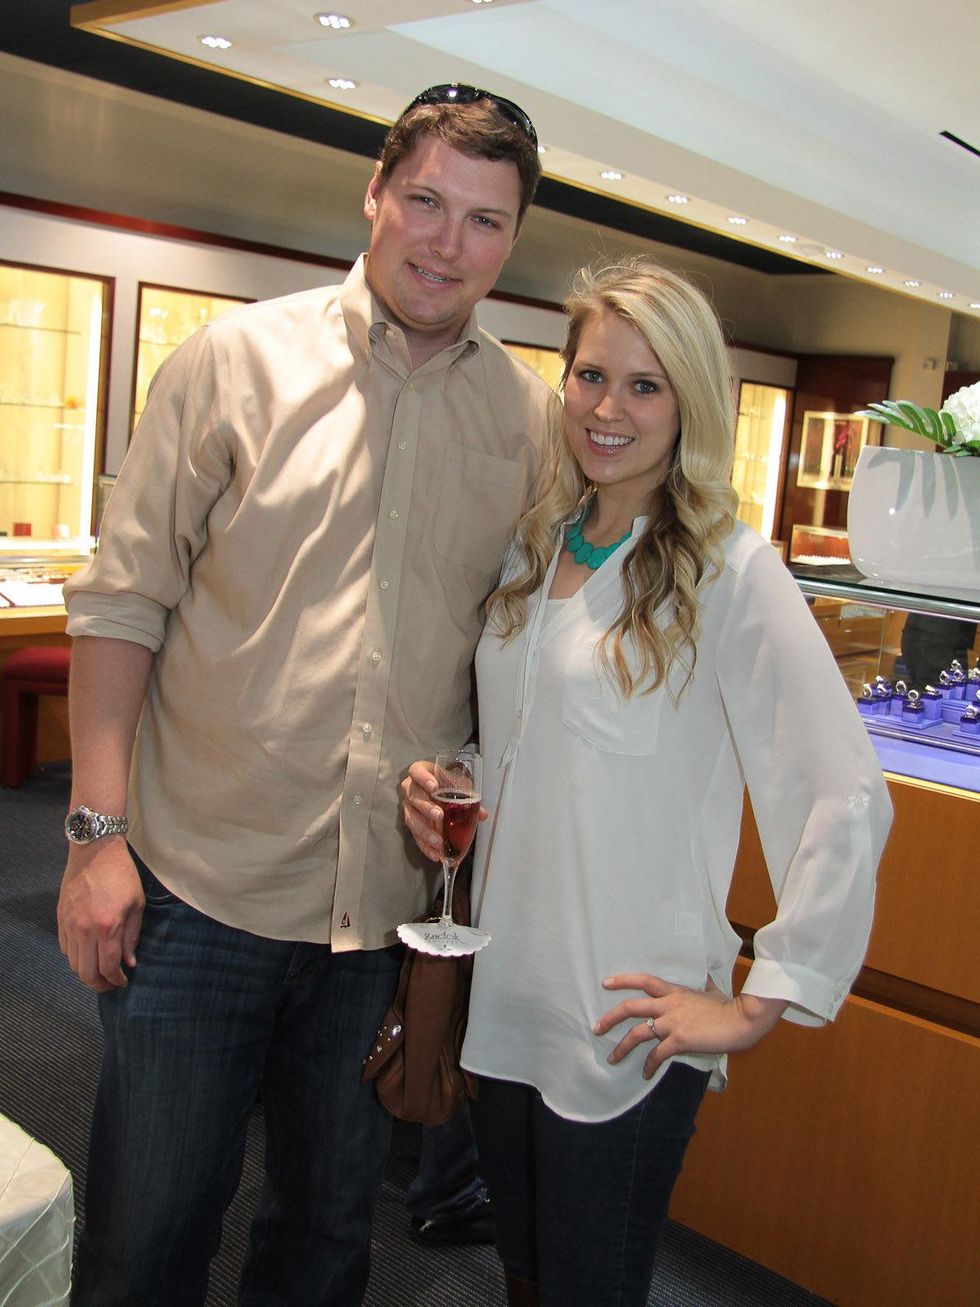 3331, Zadok Jewelers, grand wedding band event, March 2013, Olivia Foster and John Kenfield